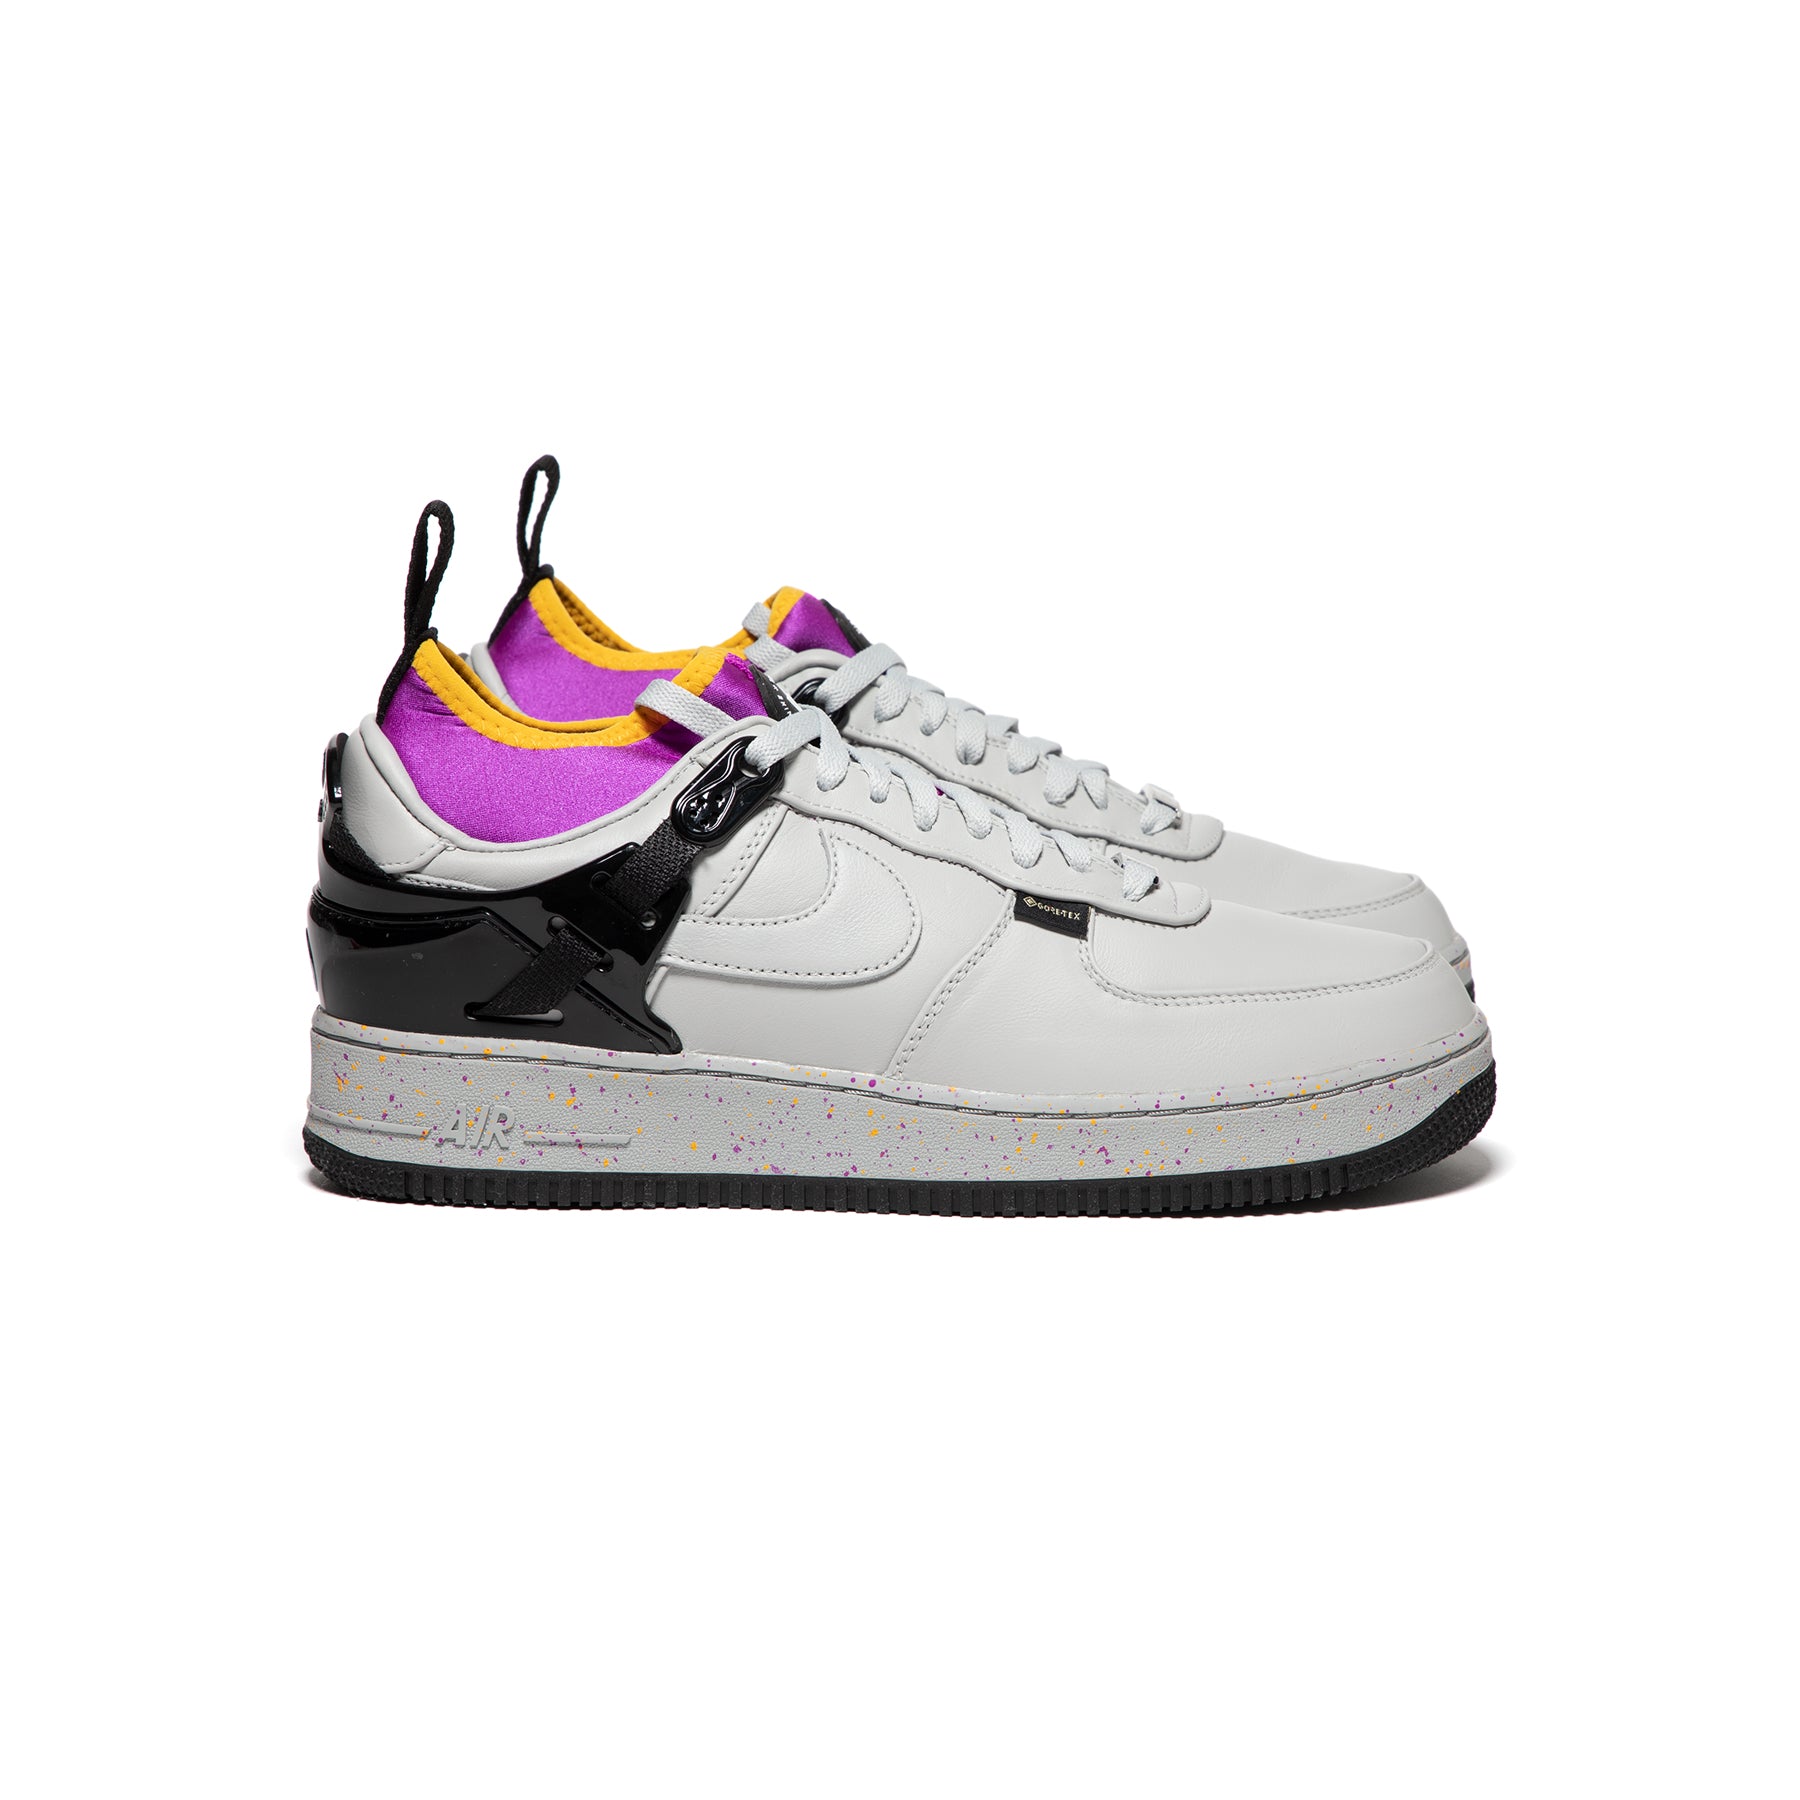 Nike Men's Air Force 1 Low SP Undercover Shoes